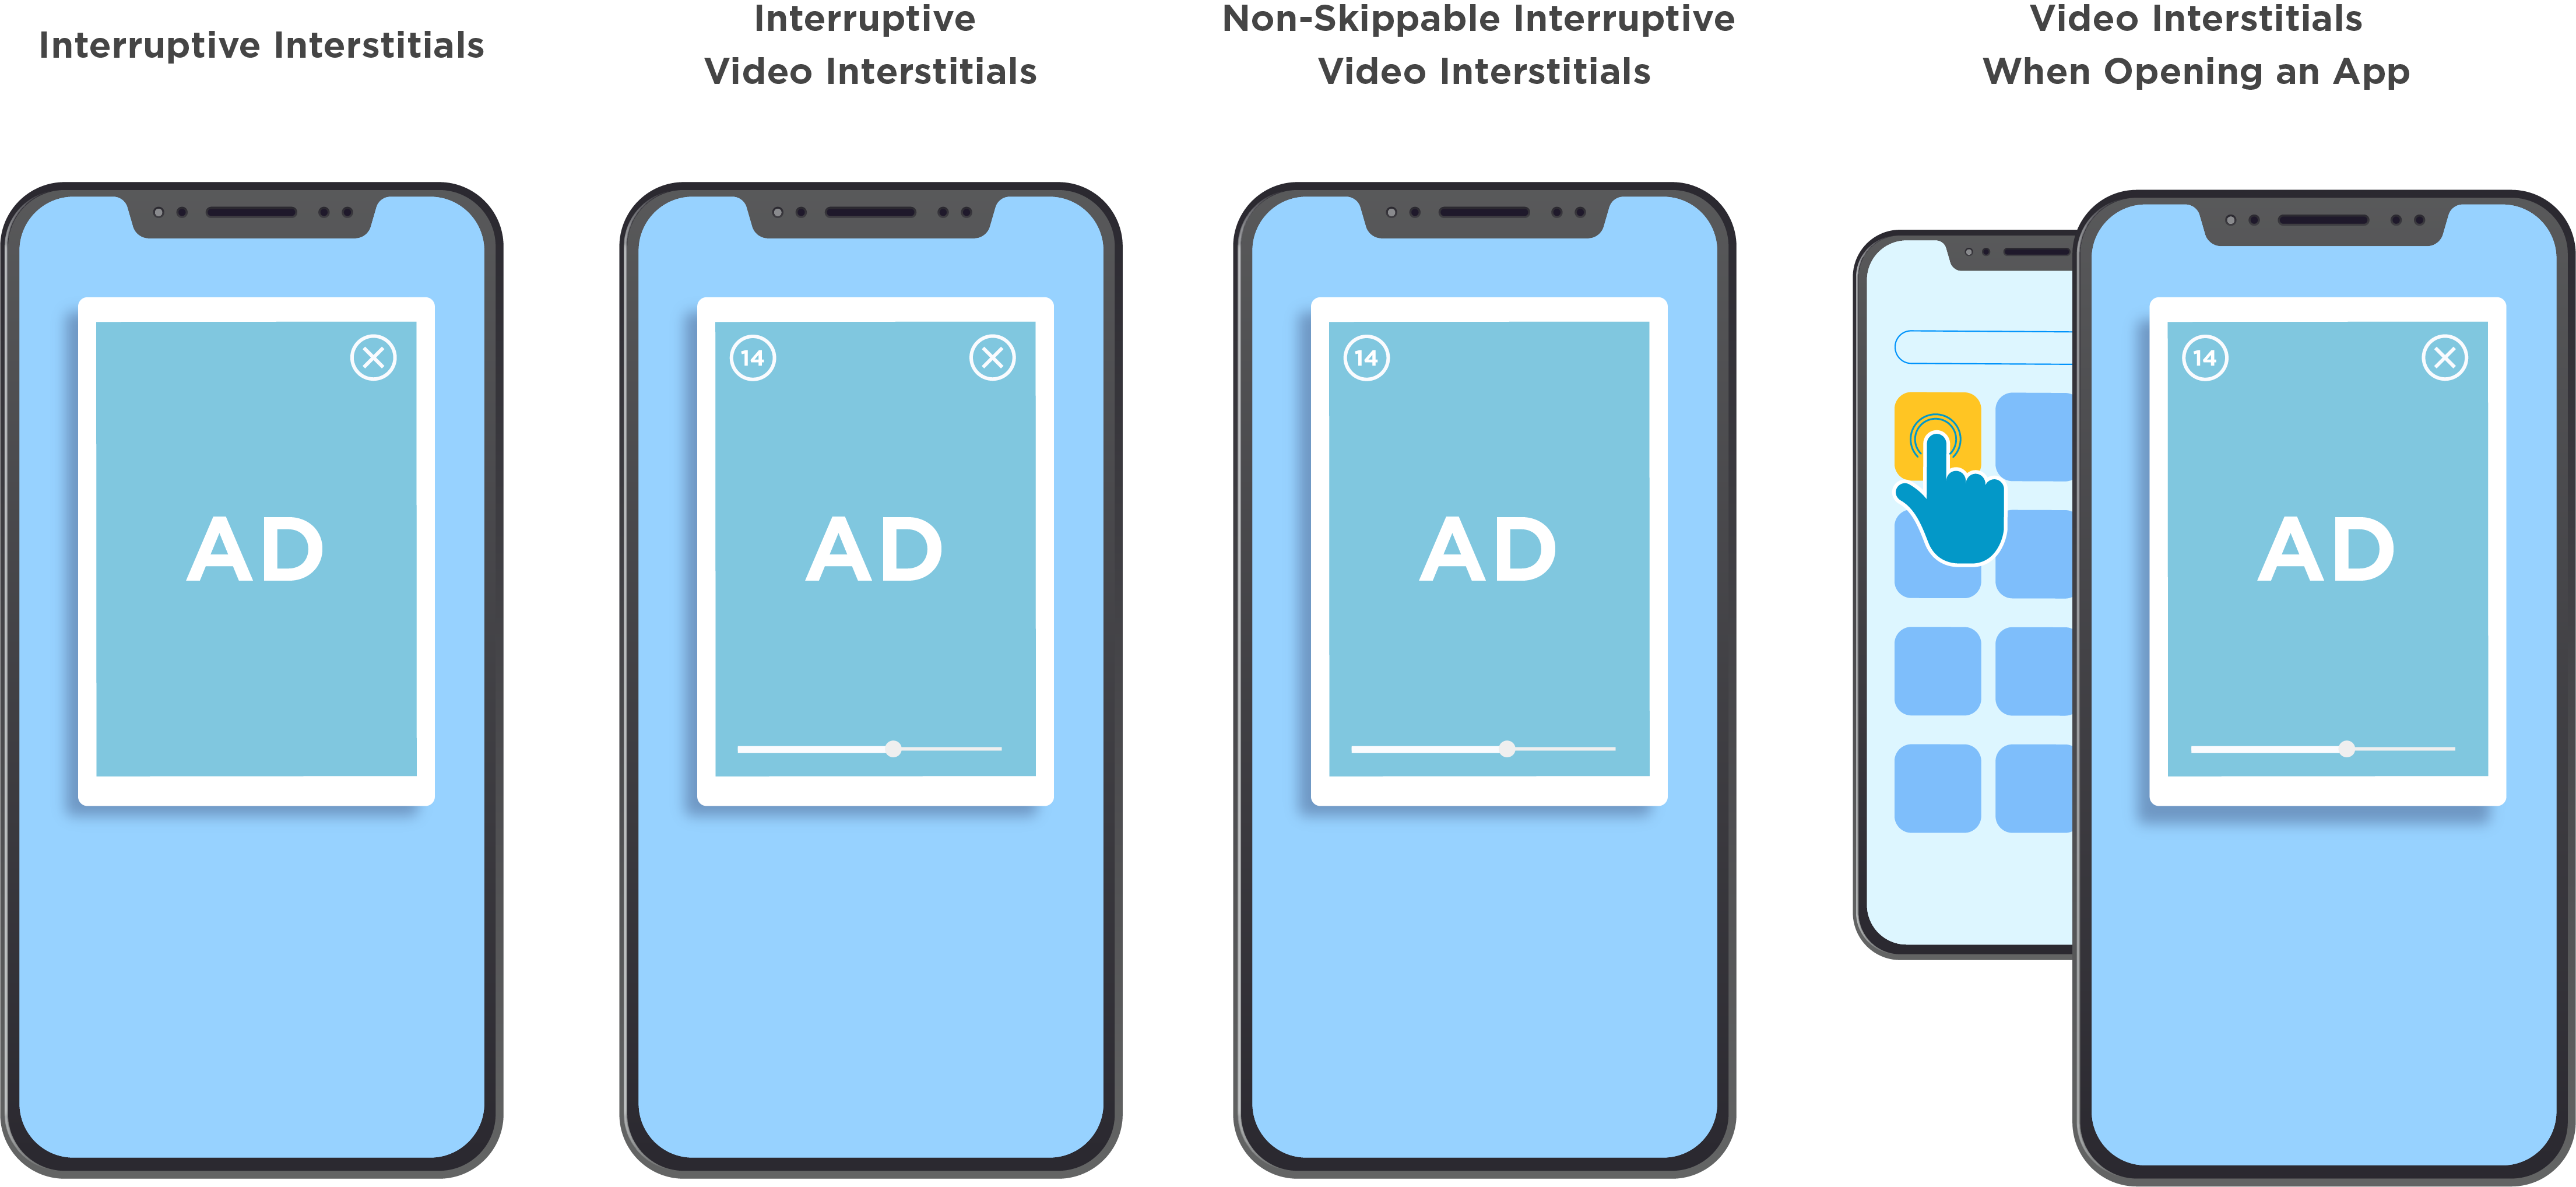 Google's mobile app experience interstitial ads